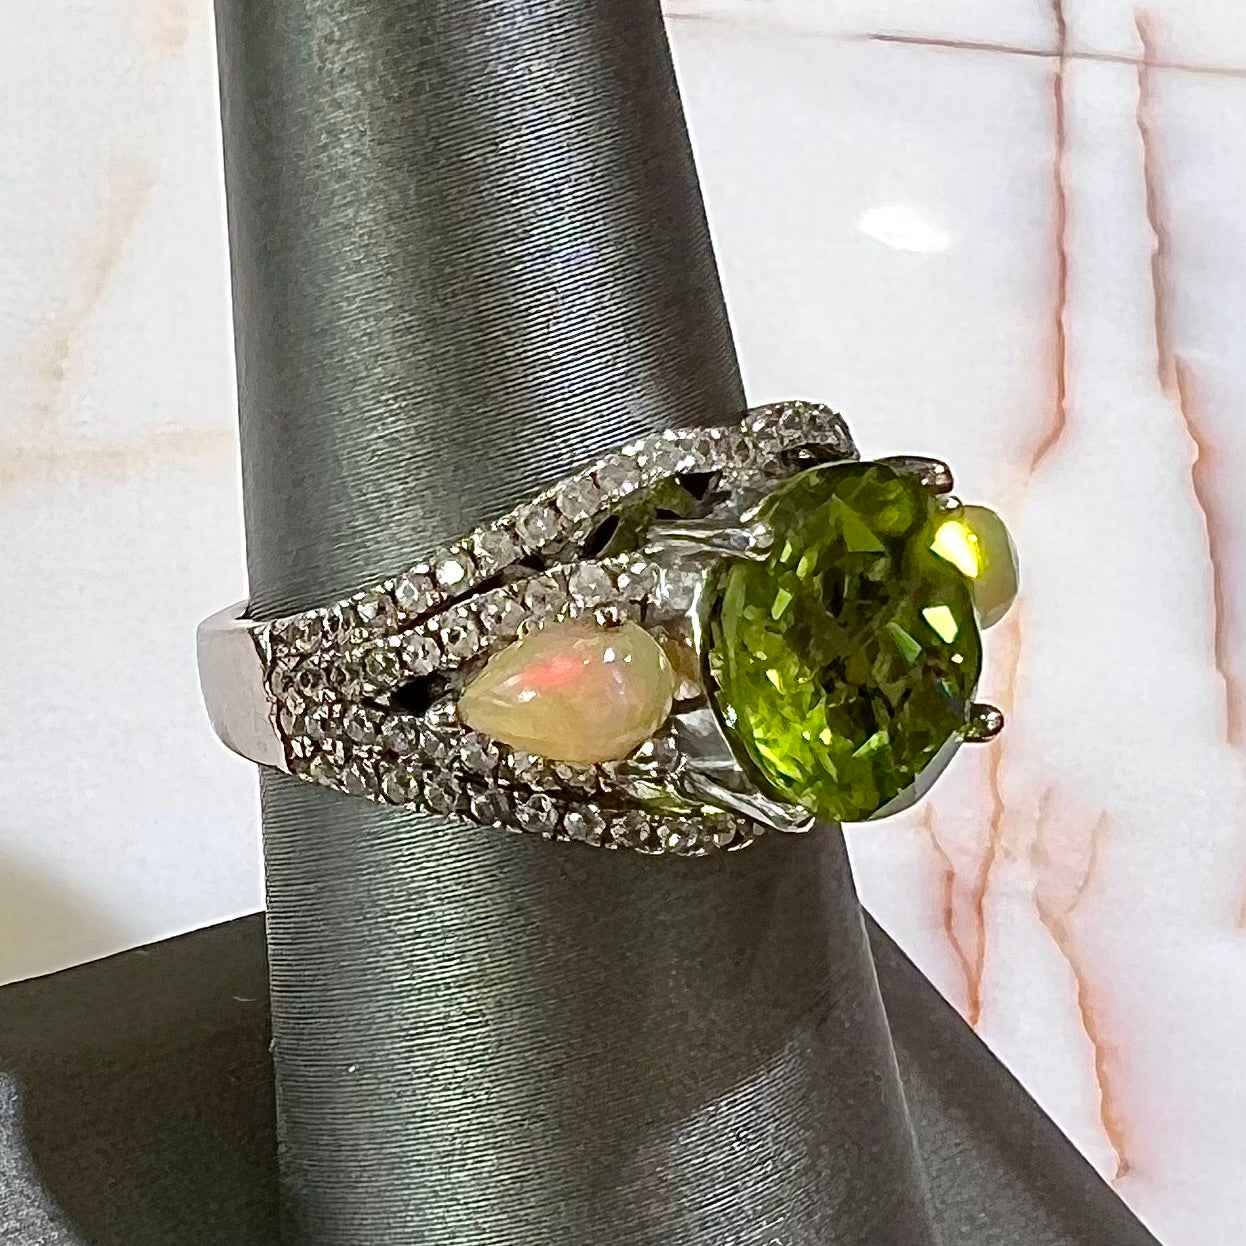 A sterling silver ring set with one large round peridot stone set between two pear shape cabochon Ethiopian opals.  Cubic zirconia stones line the ring.